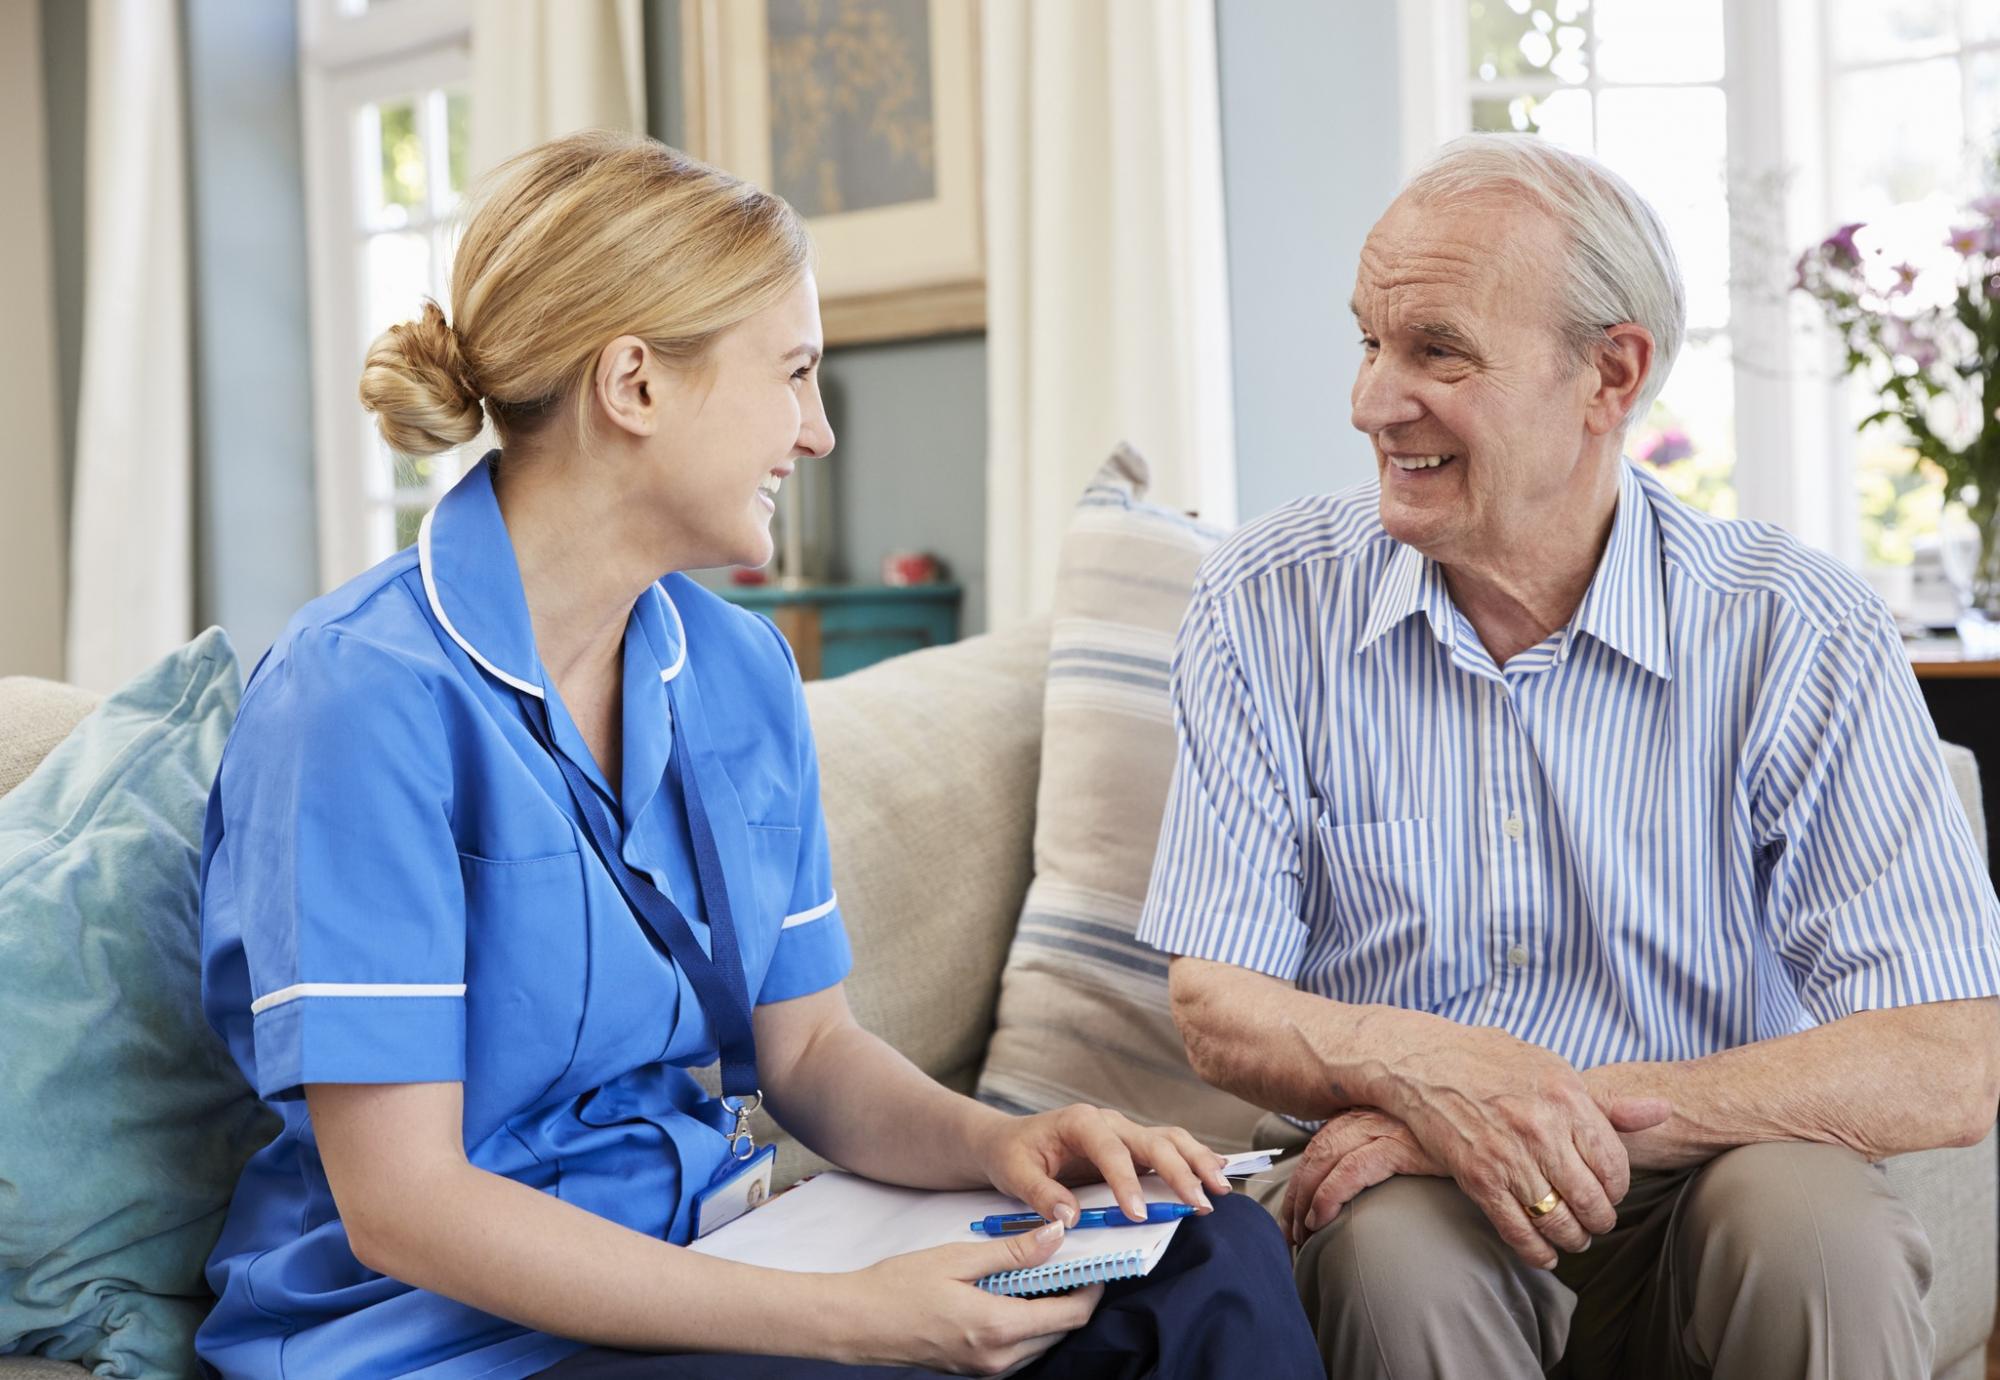 New appointee as Chief Nurse for Adult Social Care in England | UK ...